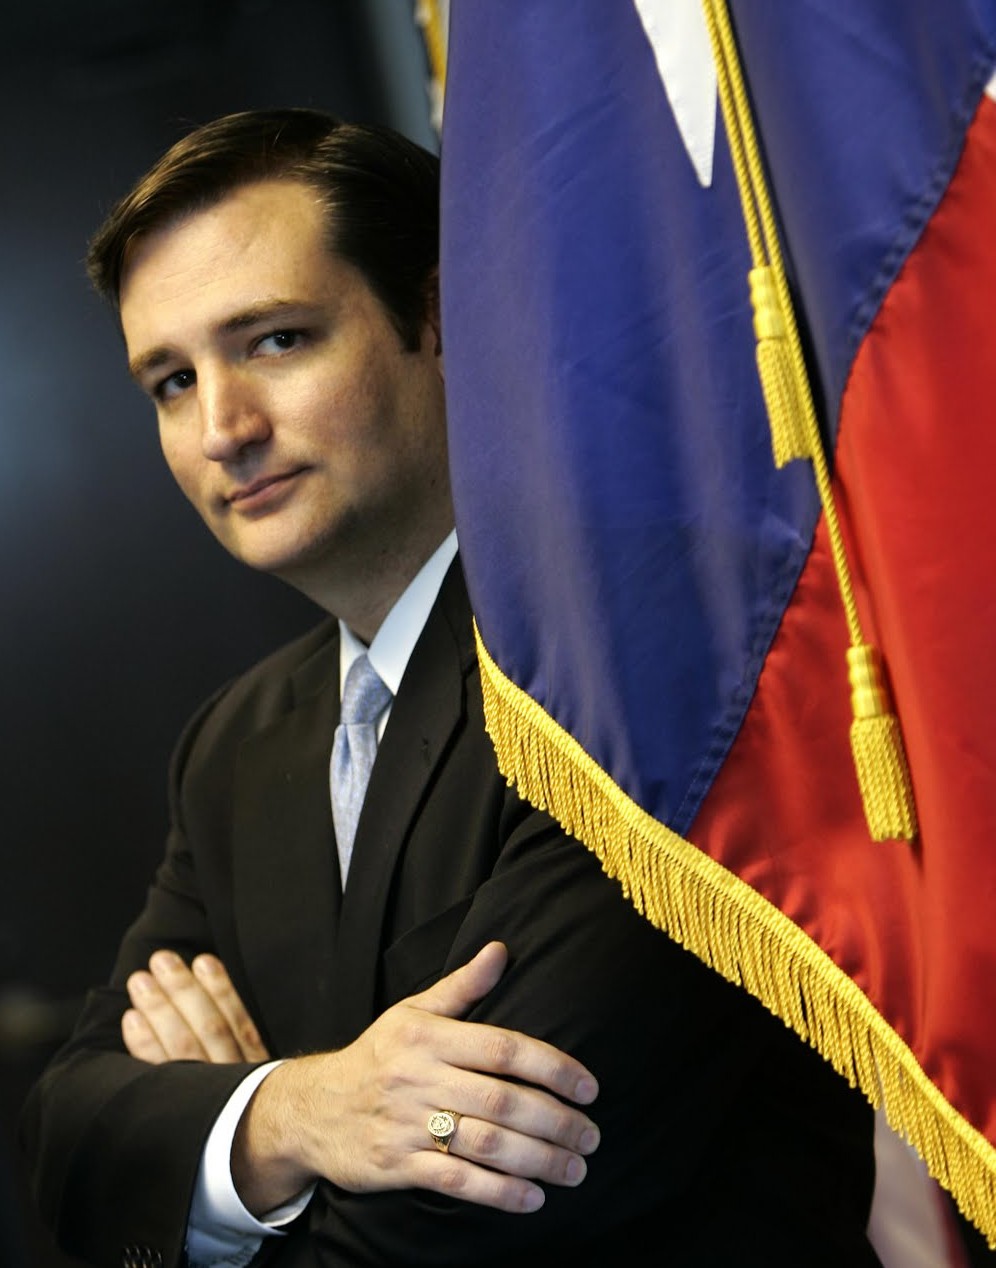 Watch Ted Cruz confront protesters over Iran nuke deal